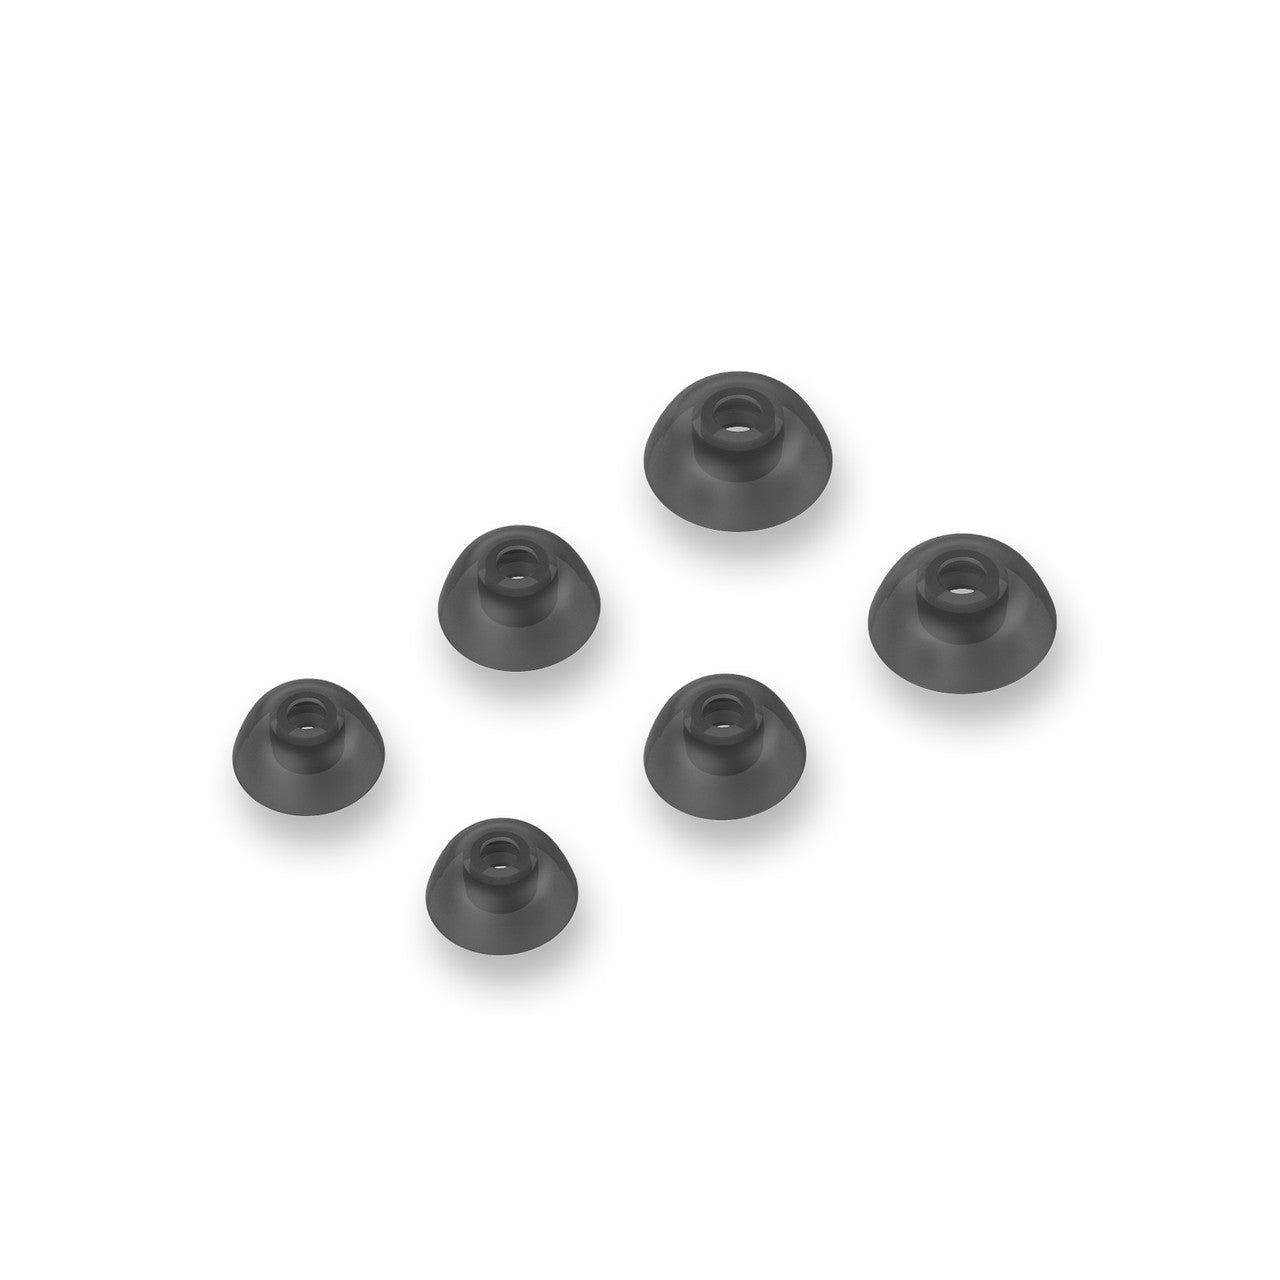 Image of Replacement Eartips for X10 Truly Wireless Sports Earphones.